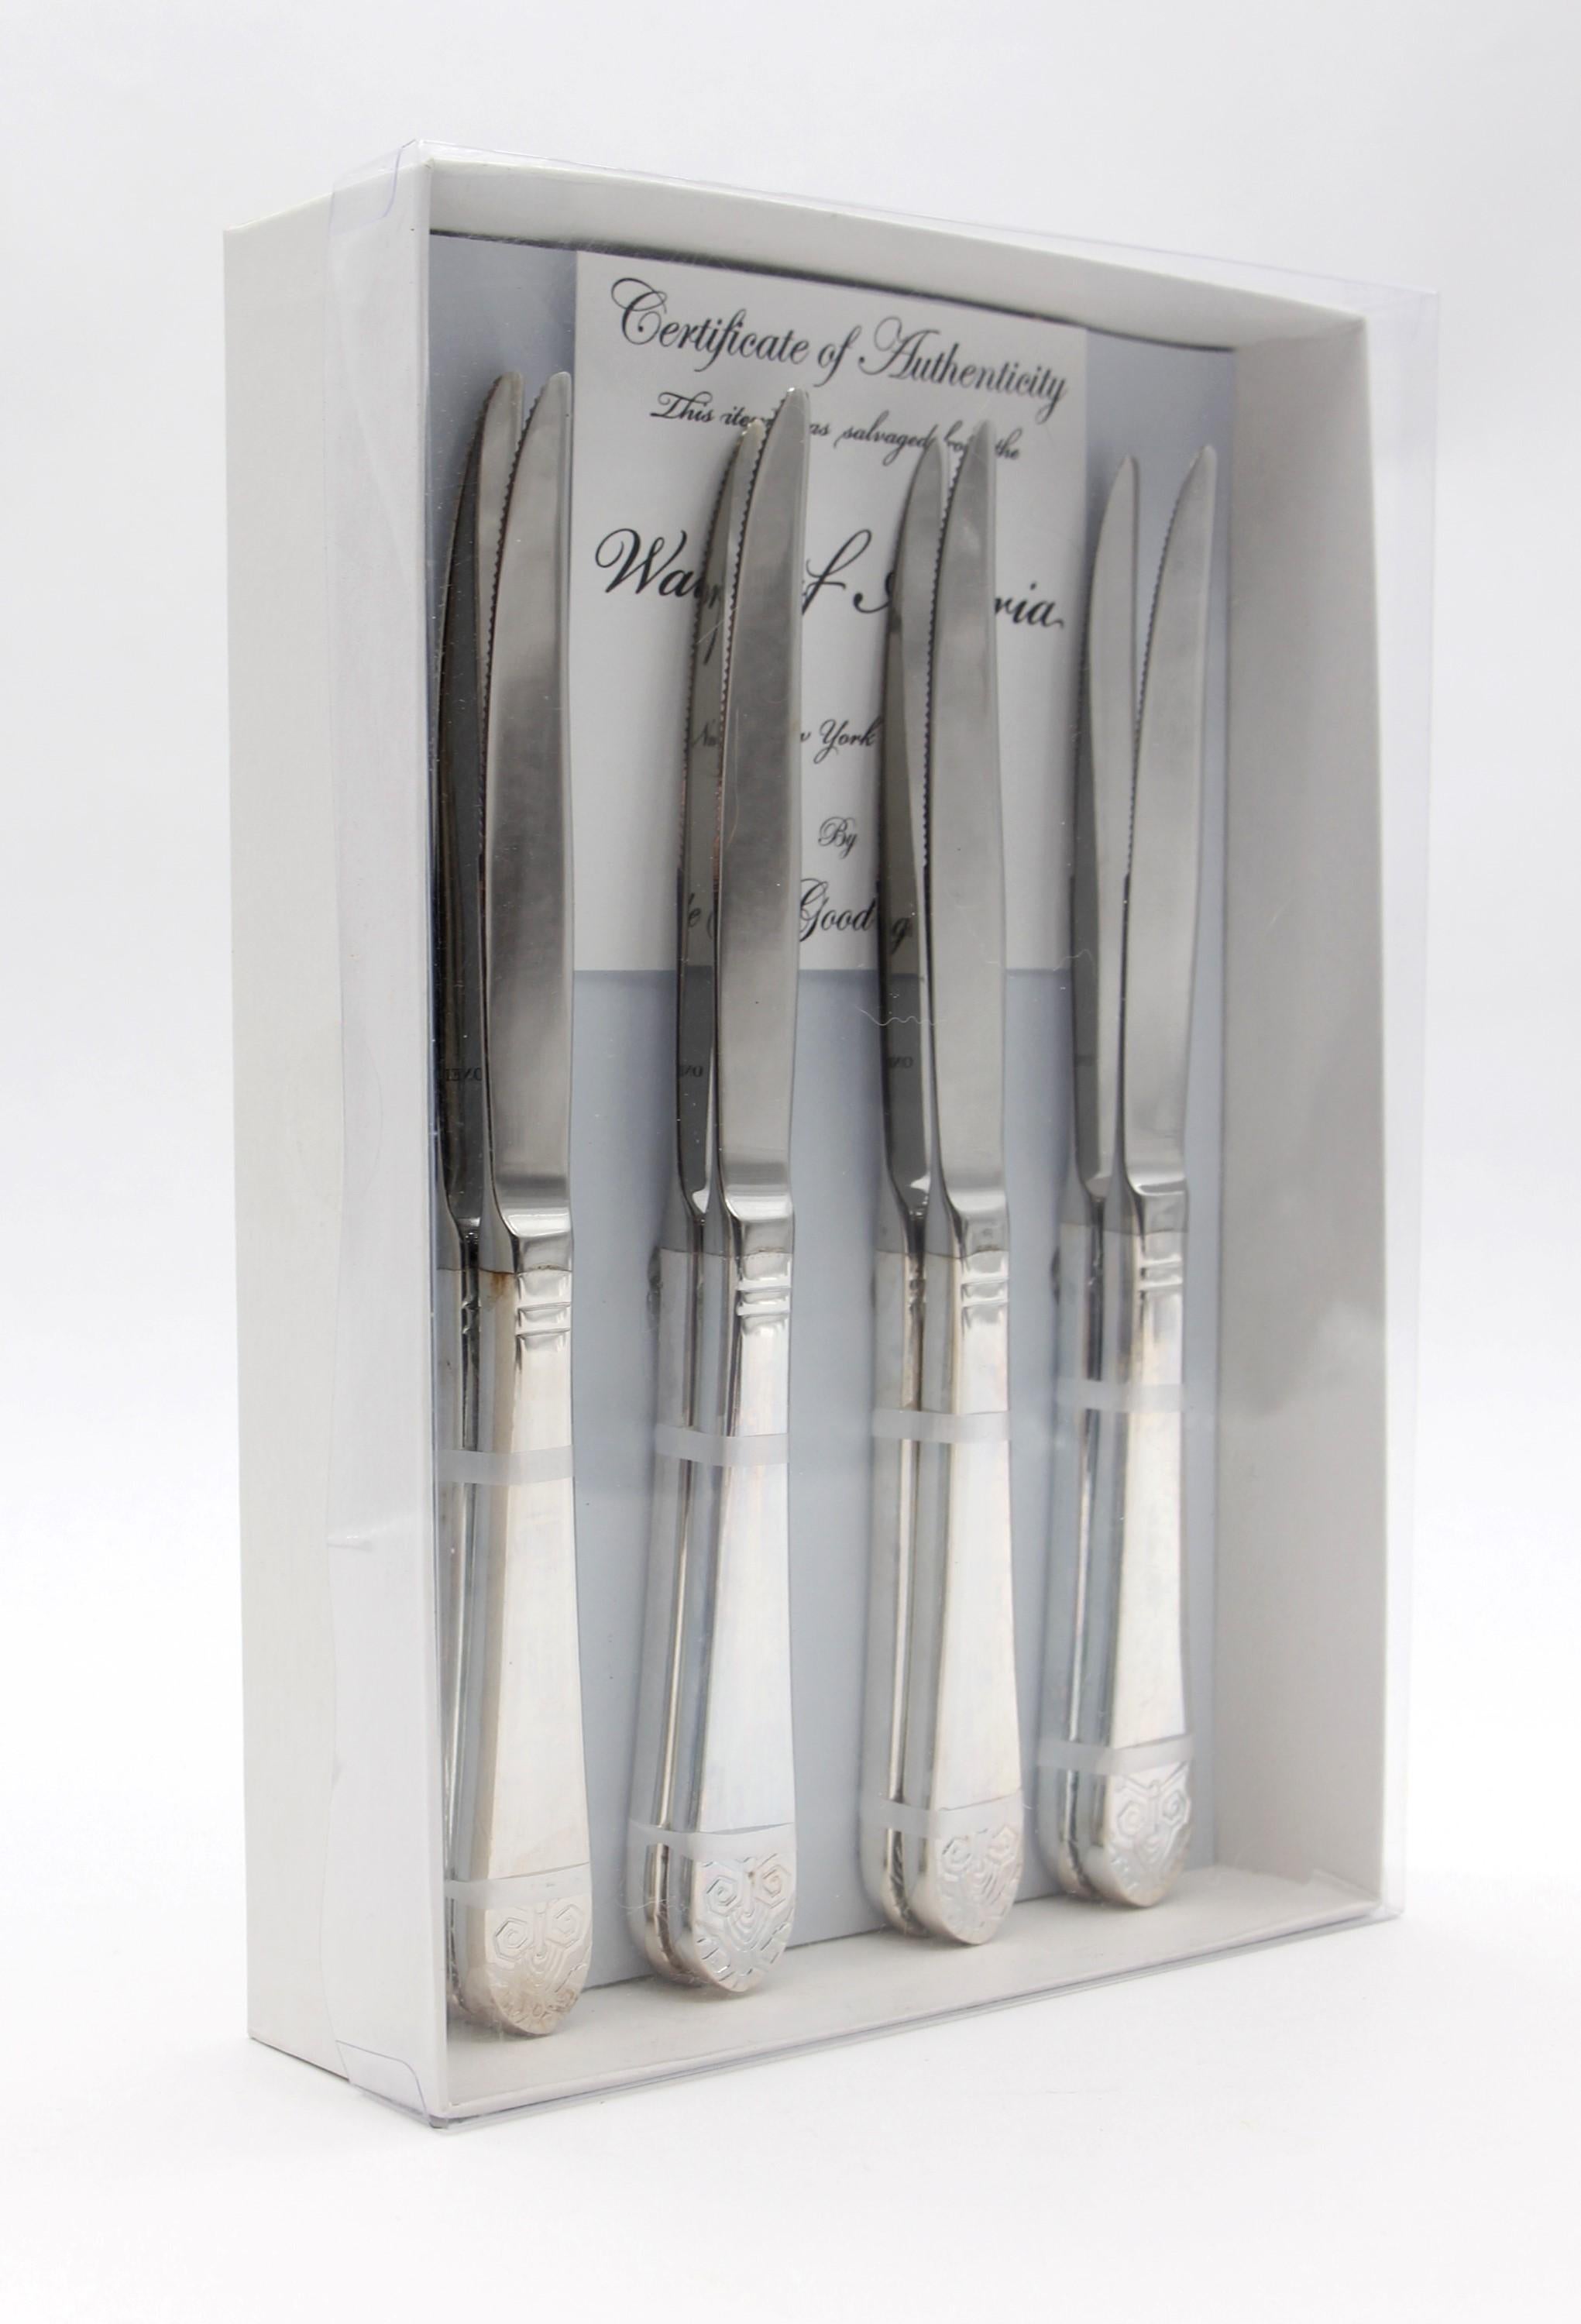 2010s Silver plated steel unused new old stock steak knife set. Made by Oneida. These pieces were backstock in the Waldorf Astoria Hotel on Park Ave in New York City and were to be used as replacements but never were. All pieces are stamped Waldorf